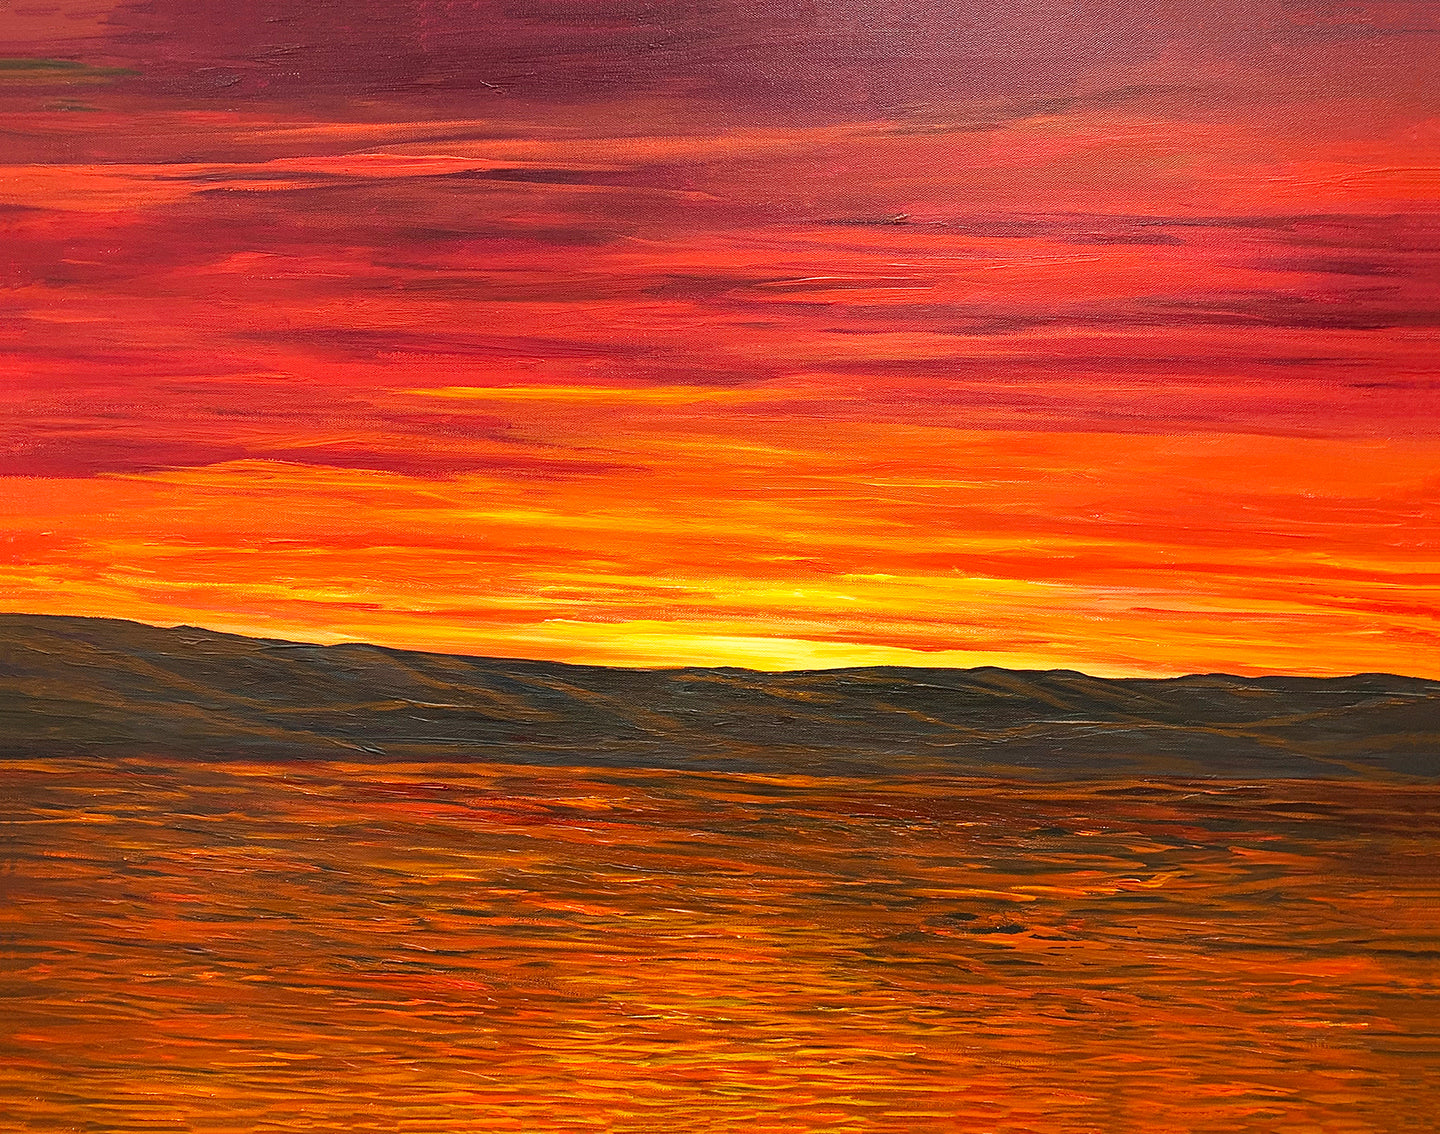 Sailor's Delight fine art print of an acrylic painting by Michigan artist Sue Gilbert. Inspired by the setting sun over a lake on a warm summer evening.